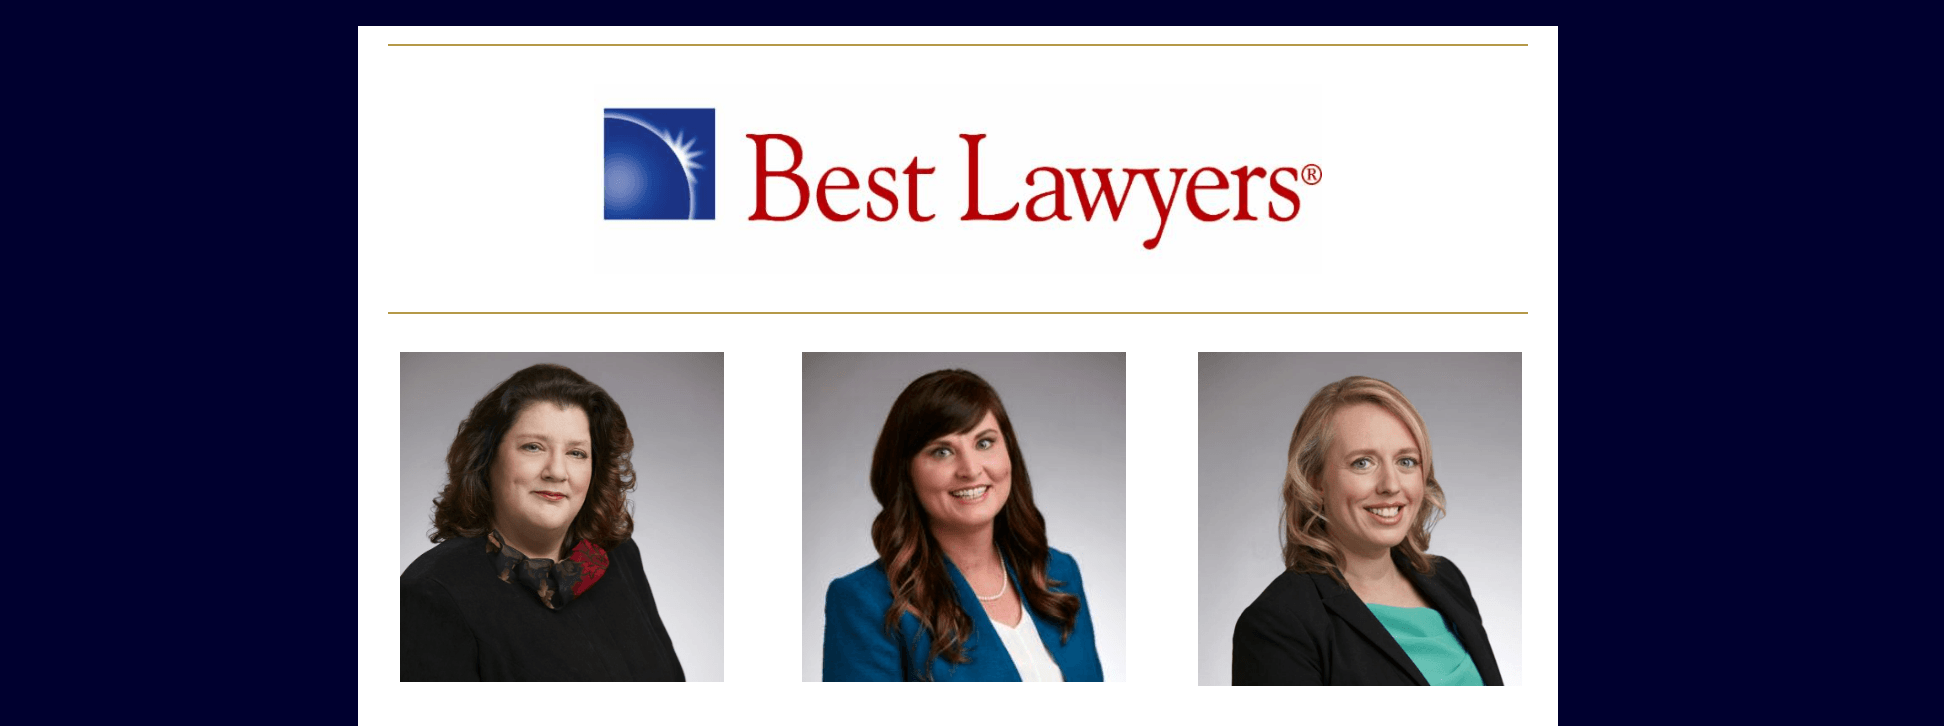 Best Lawyers® 2020 Recognizes Carolyn Grimes, Jessica Leischner and Rebecca Wade